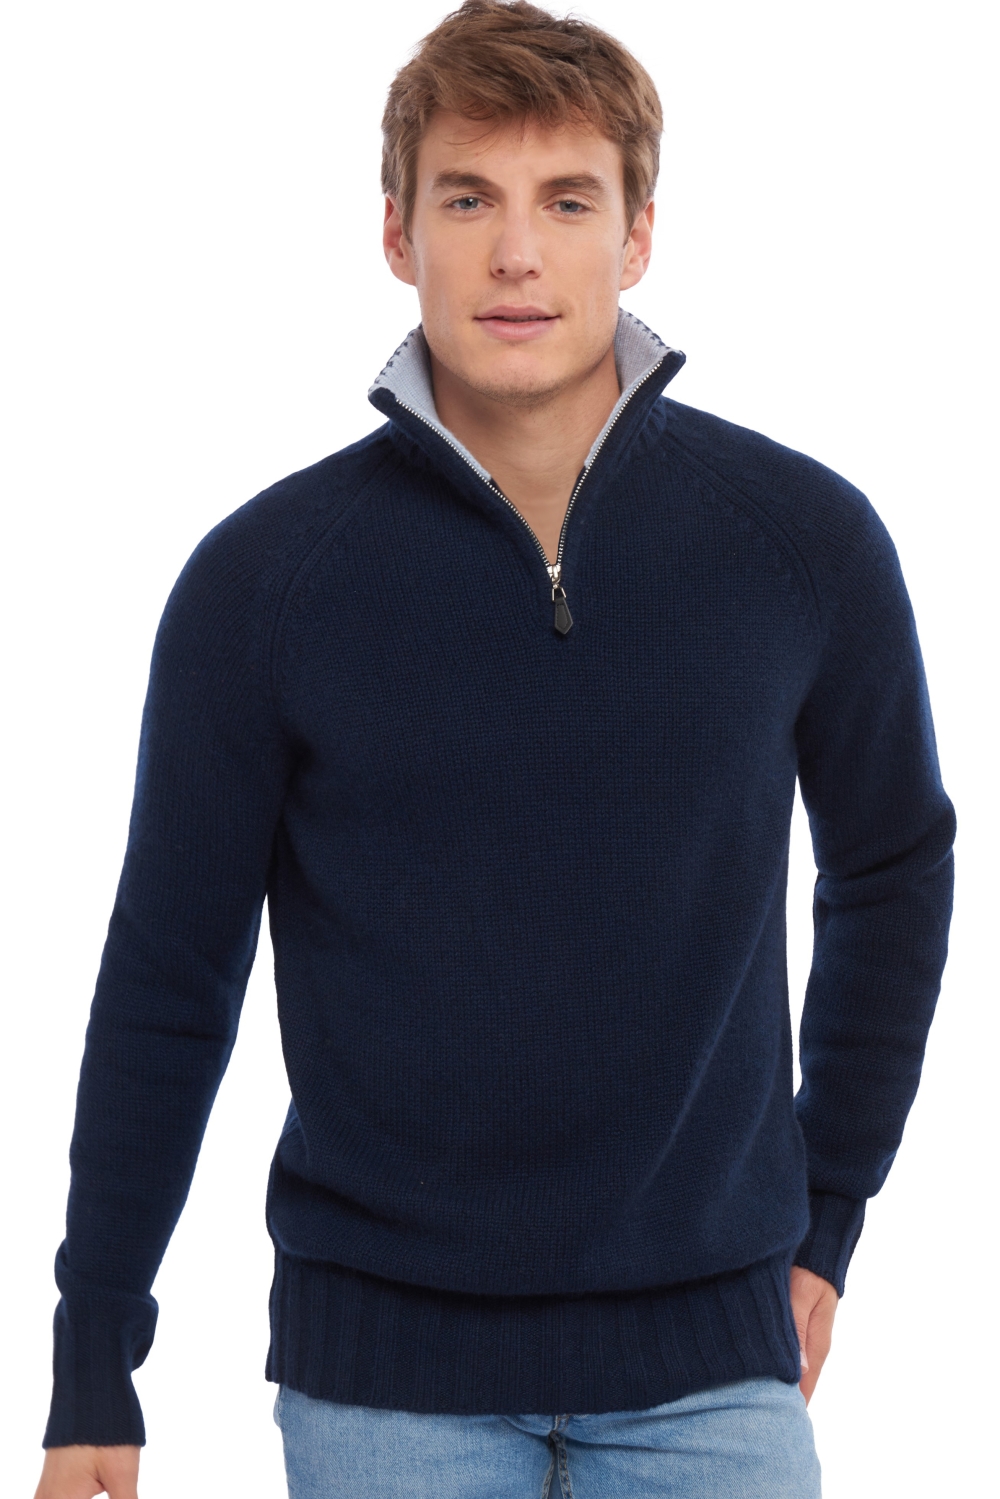 Cashmere men polo style sweaters olivier dress blue bayou 2xl